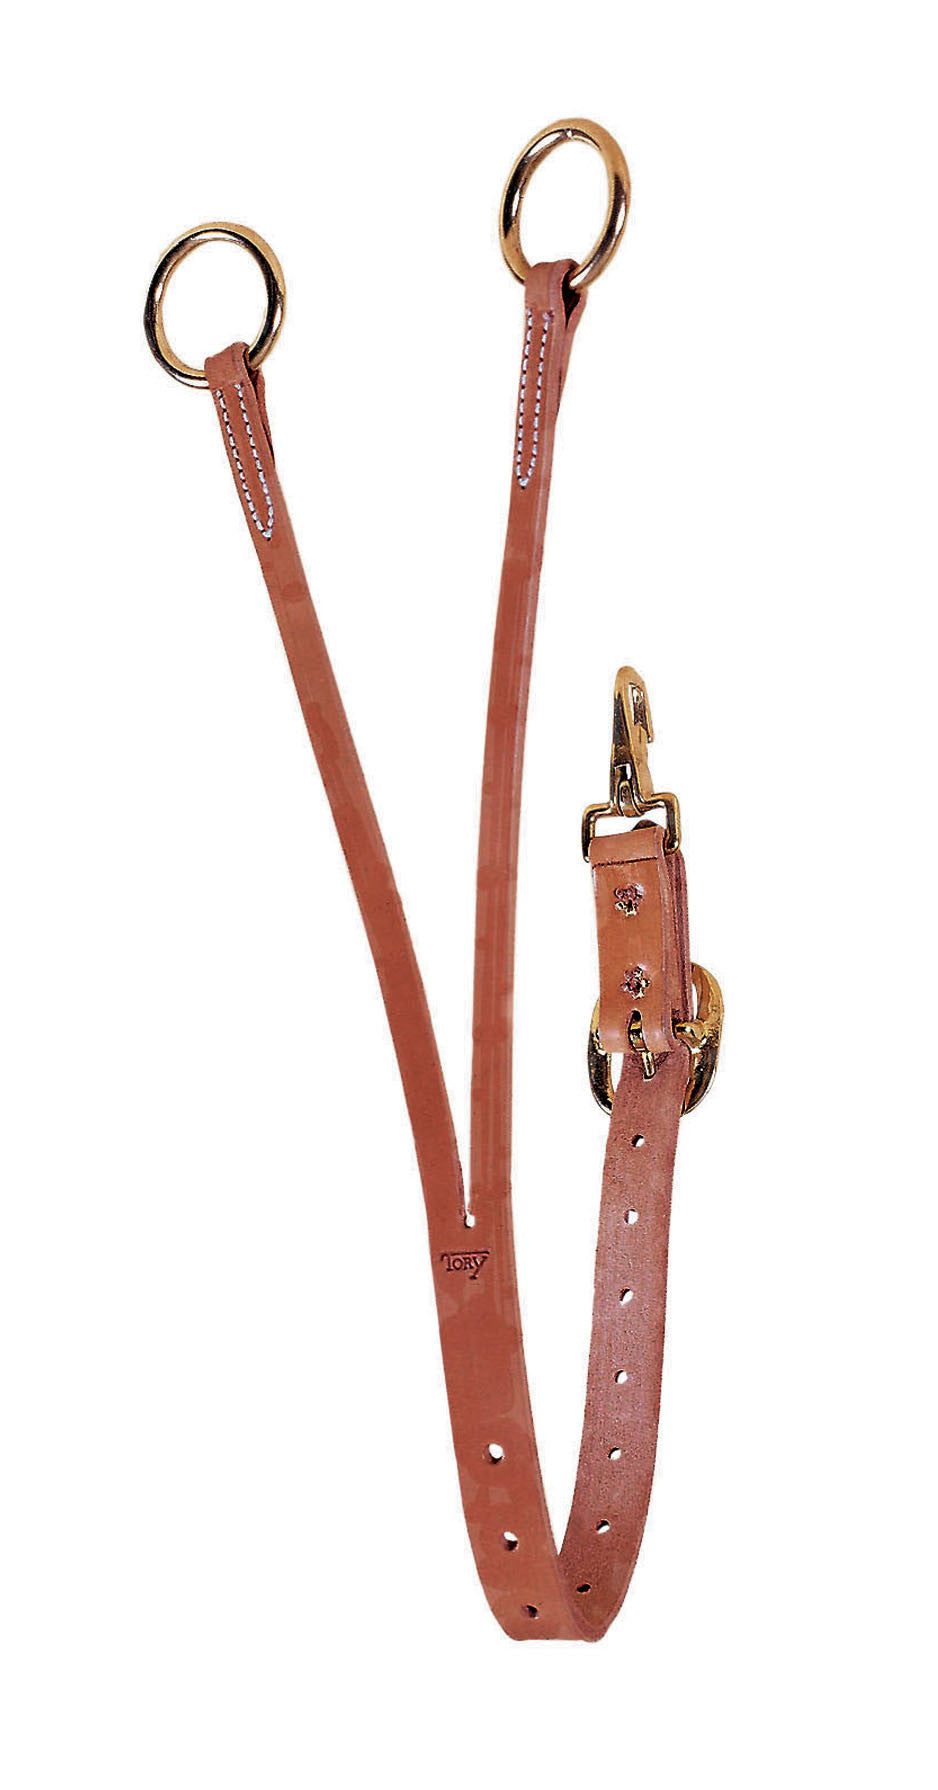 Tory Leather Harness Leather Training Fork with Solid Brass Hardware